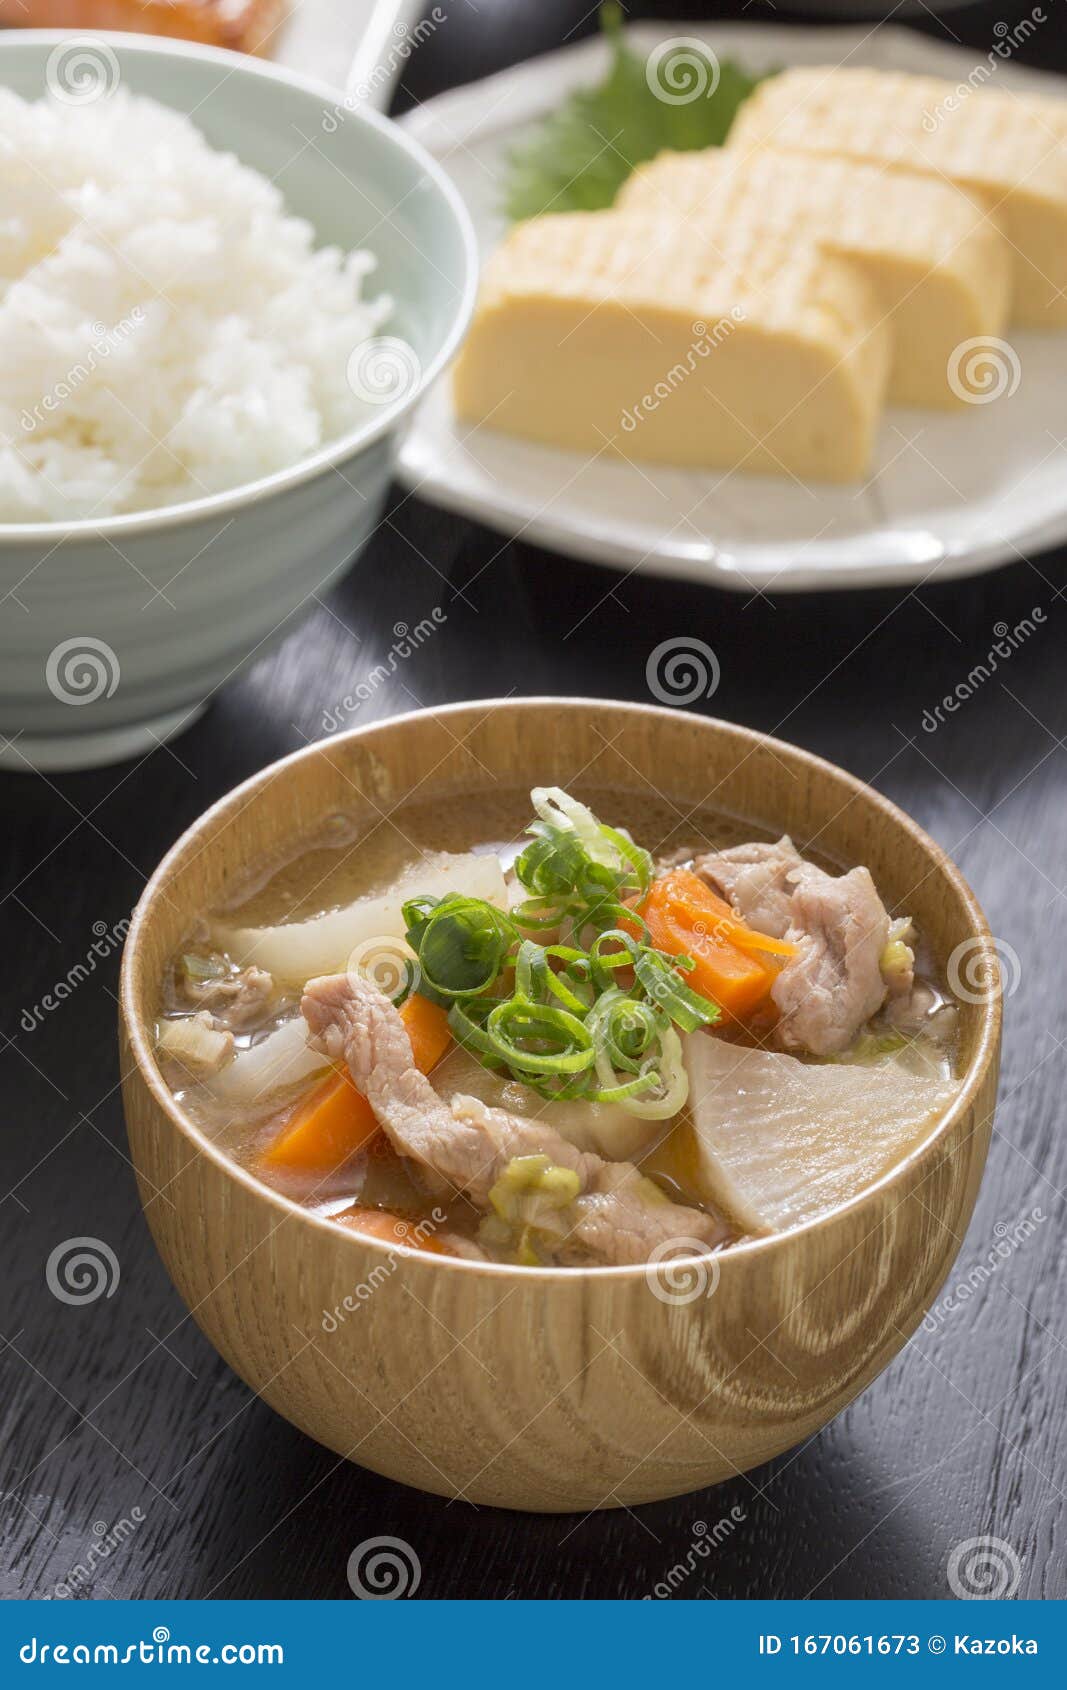 Miso Soup With Pork And Vegetables In Japanese Food Stock Image Image Of Tableware Radishes 167061673,What To Write On A Sympathy Card For Loss Of Husband